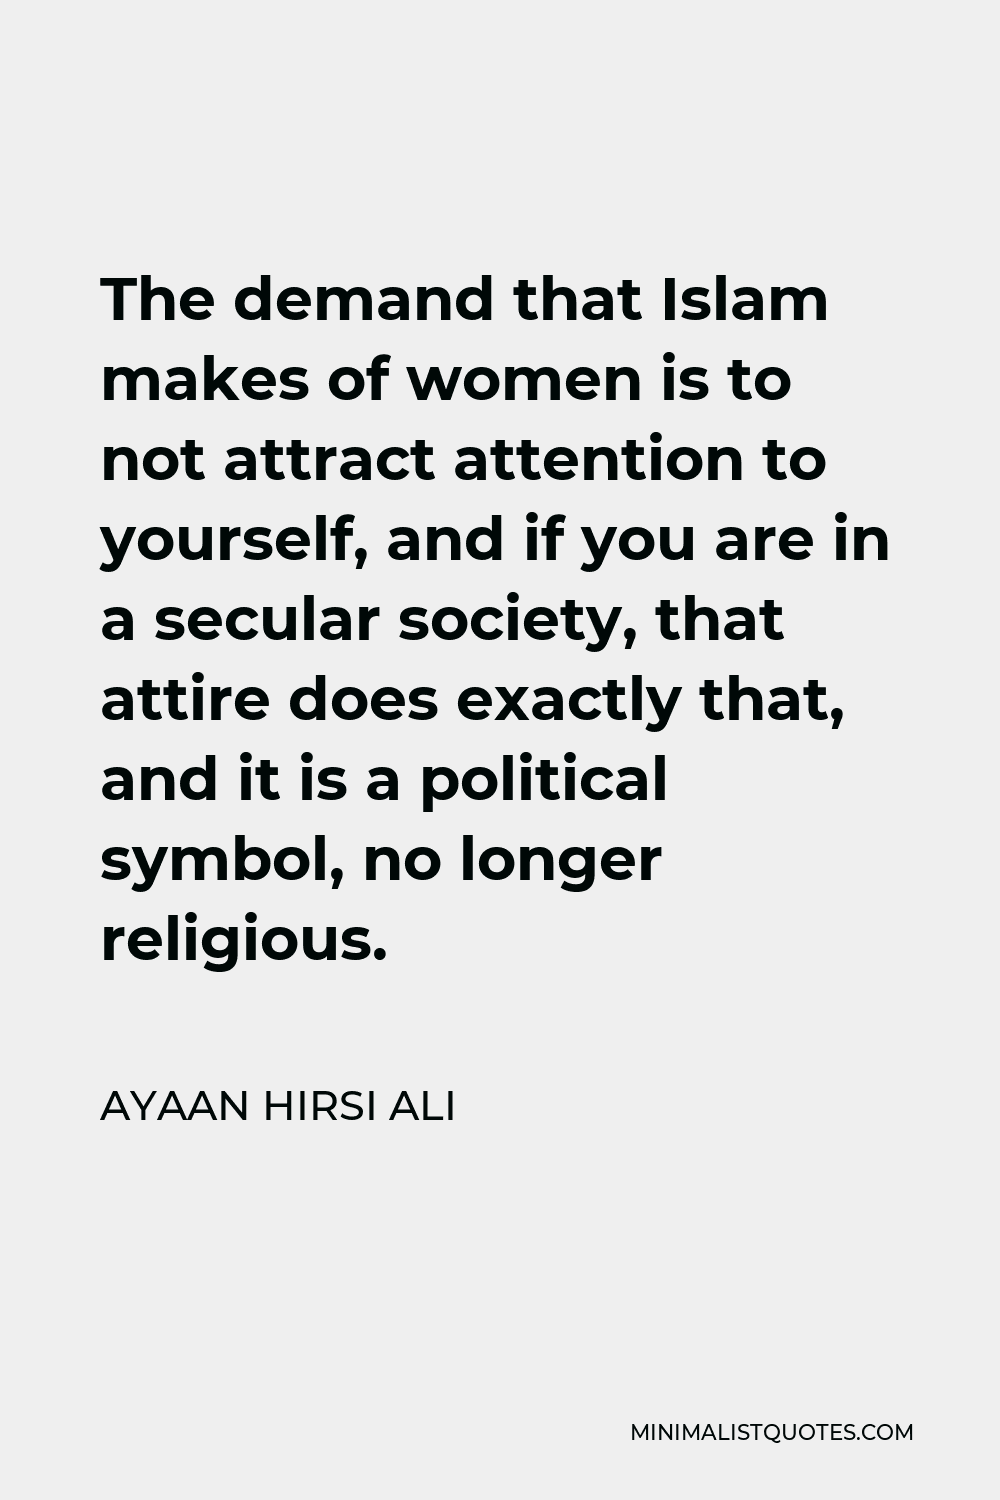 Ayaan Hirsi Ali Quote - The demand that Islam makes of women is to not attract attention to yourself, and if you are in a secular society, that attire does exactly that, and it is a political symbol, no longer religious.